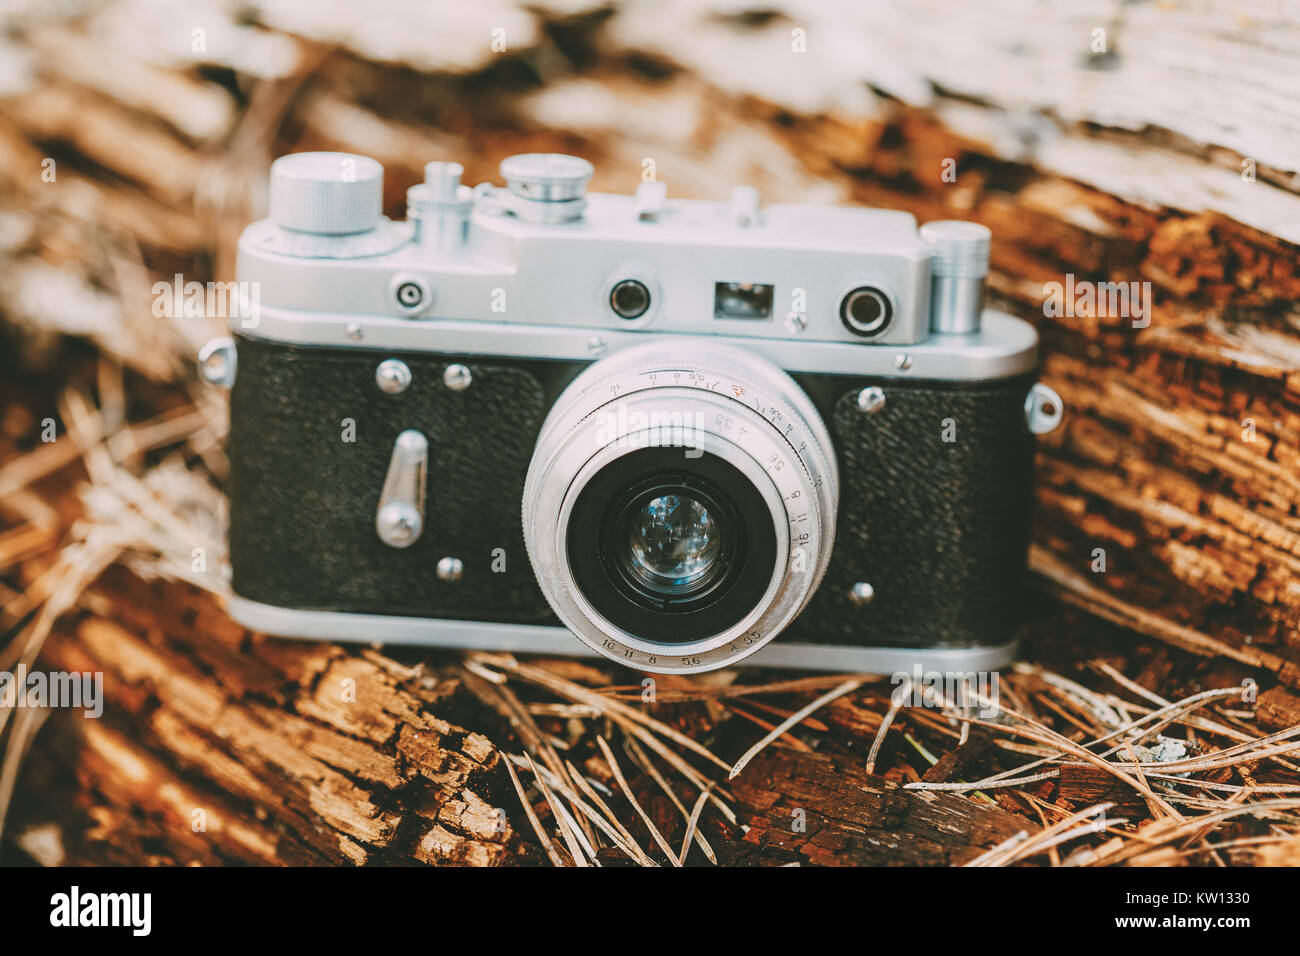 35mm Vintage Old Retro Small-Format Rangefinder Camera On Old Fallen Wood Tree In Forest. Stock Photo